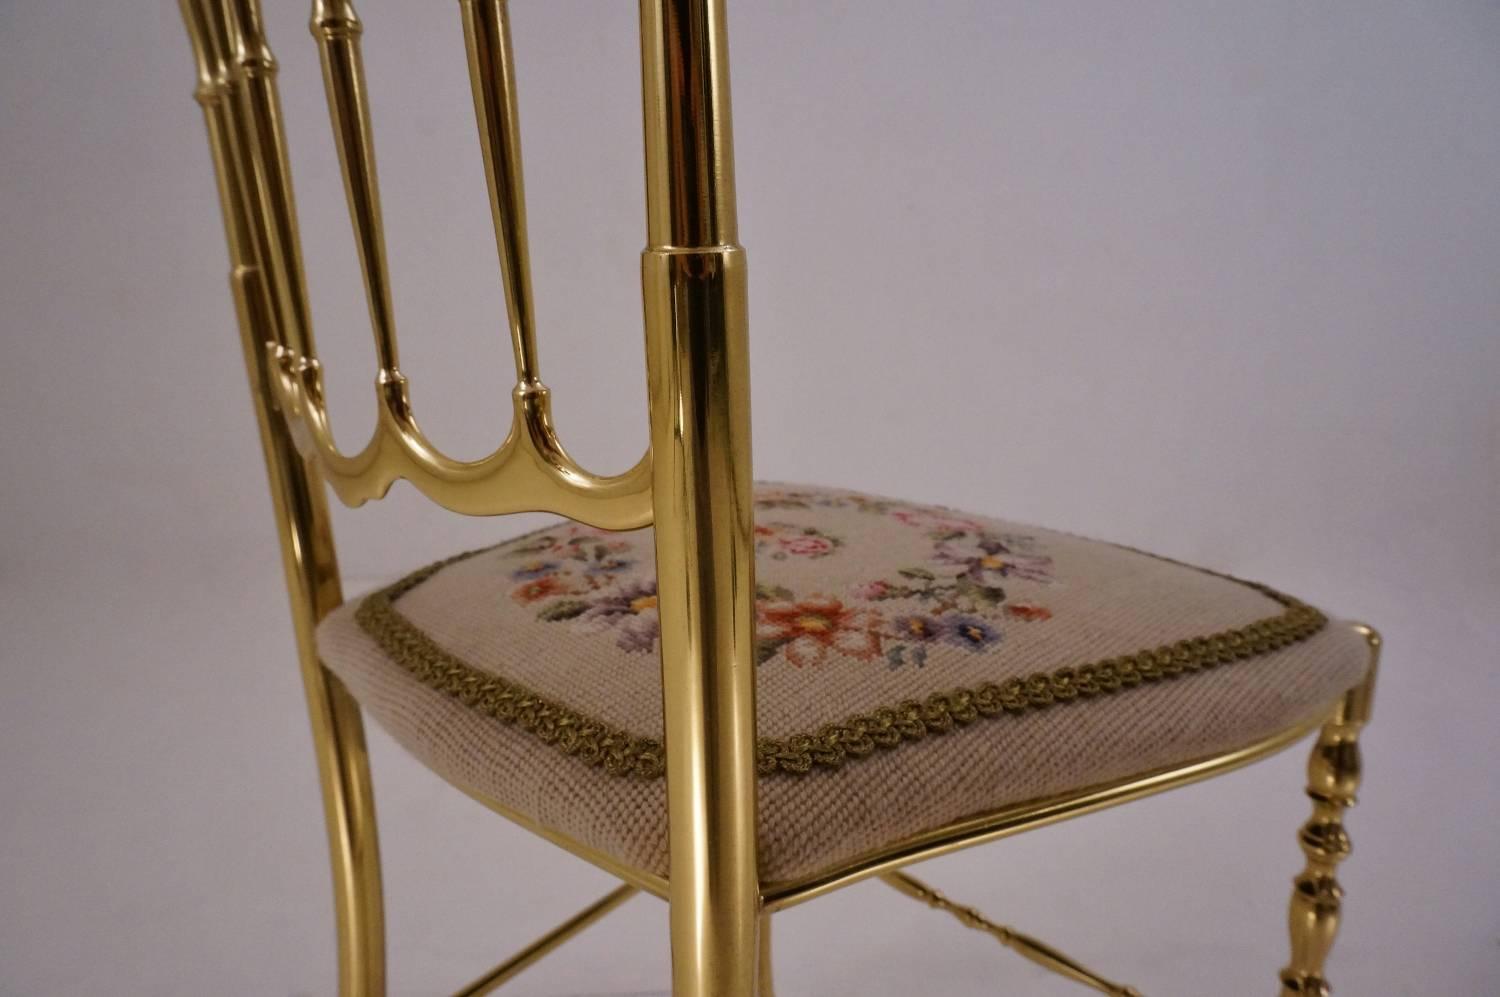 20th Century Chiavari Solid Brass Chair, Needle Point Seat and High Back, circa 1950s Italian